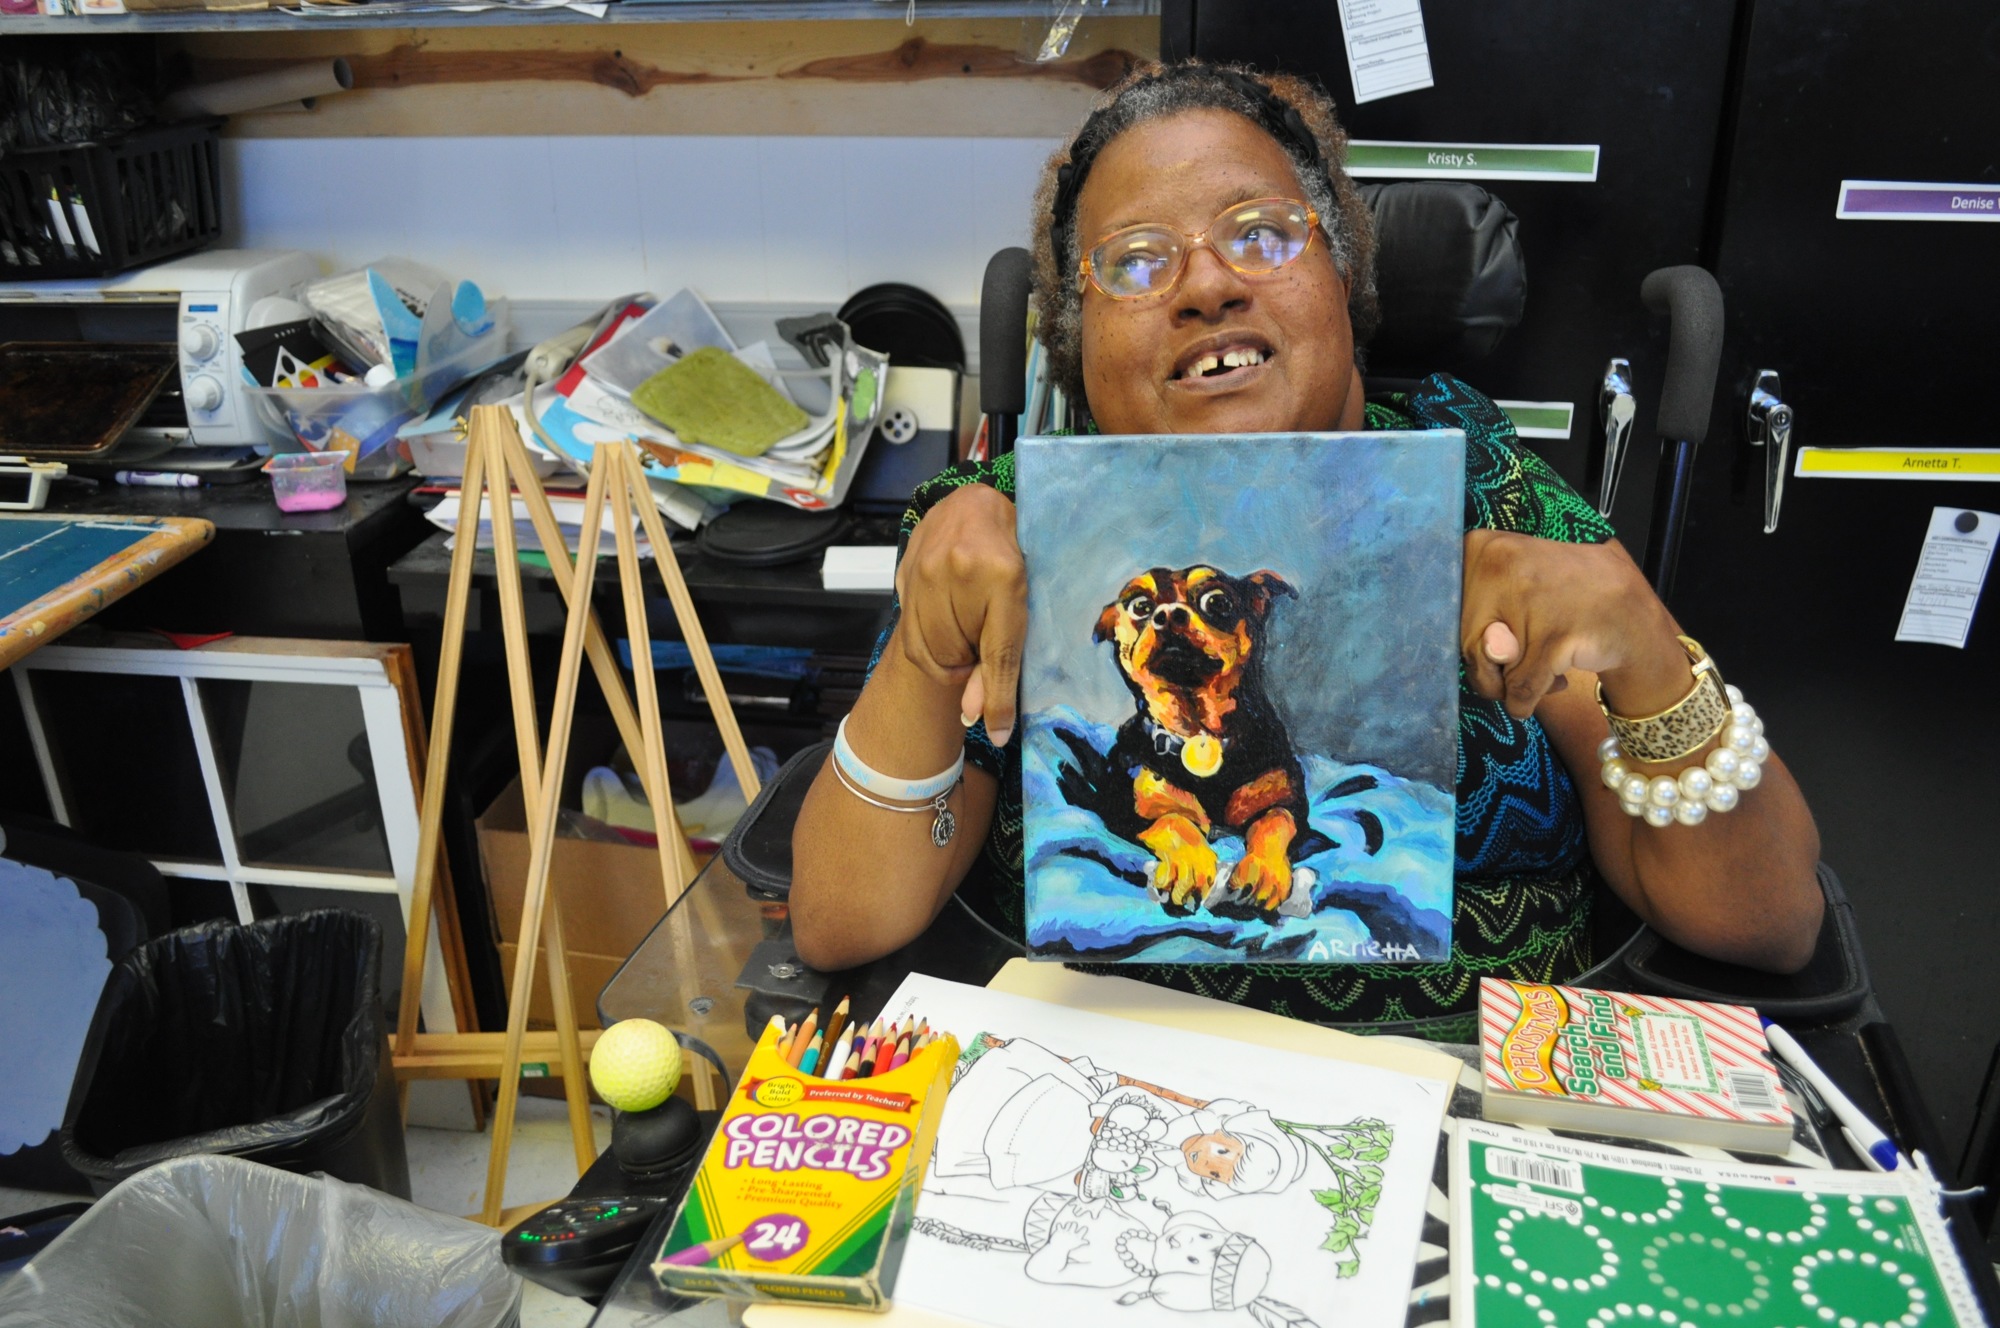 One of the program’s most accomplished artists, Arnetta, painted this canvas of instructor Viktoria Bridgeford’s dog.